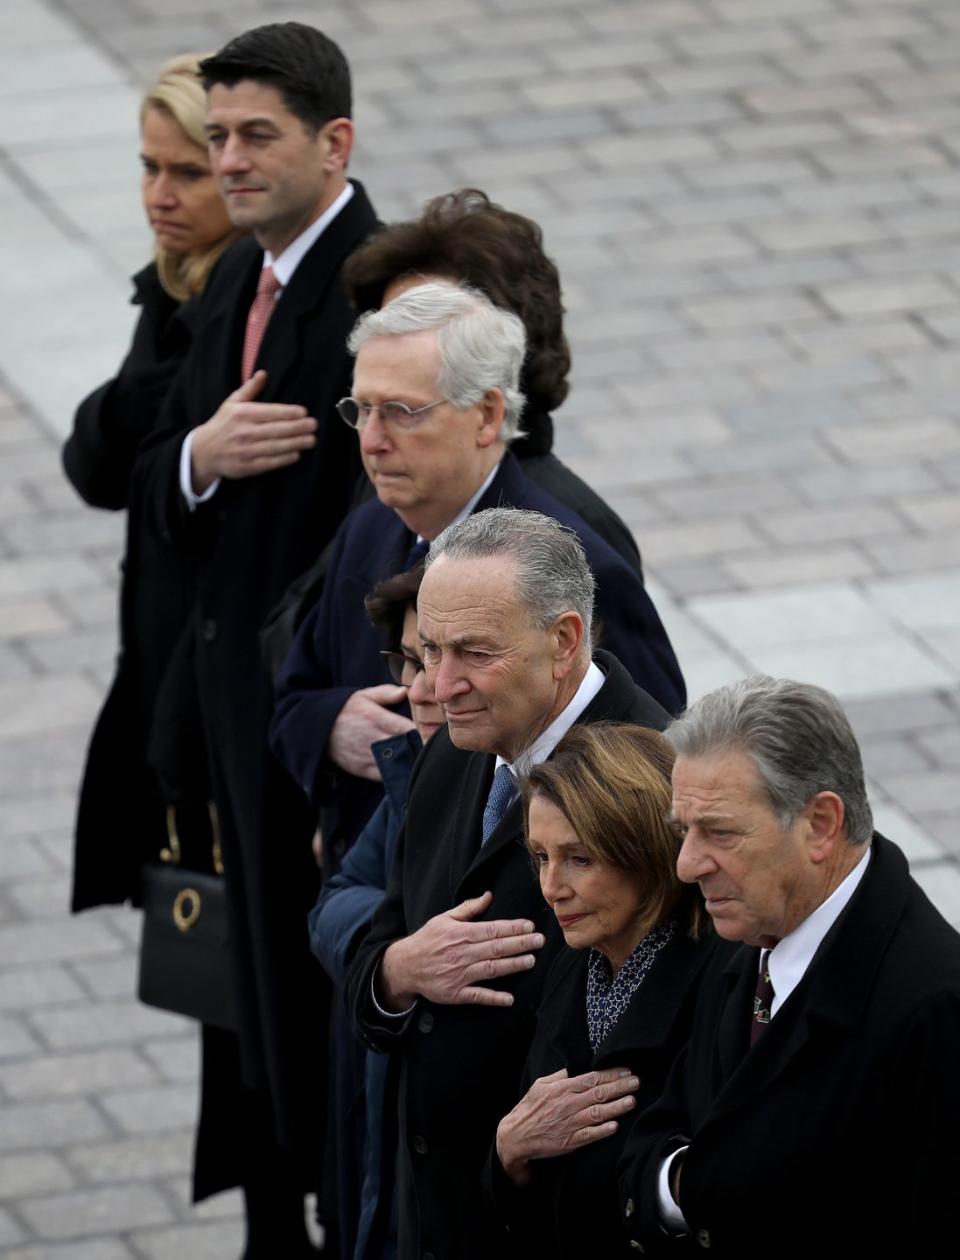 <p>Congressional leaders Speaker of the House Paul Ryan (R-WI), Senate Majority Leader Mitch McConnell (R-KY), Senate Minority Leader Chuck Schumer (D-NY), and House Minority Leader Nancy Pelosi (D-CA) watch as a U.S. military honor guard team carries the flag draped casket of former U.S. President George H. W. Bush.</p>